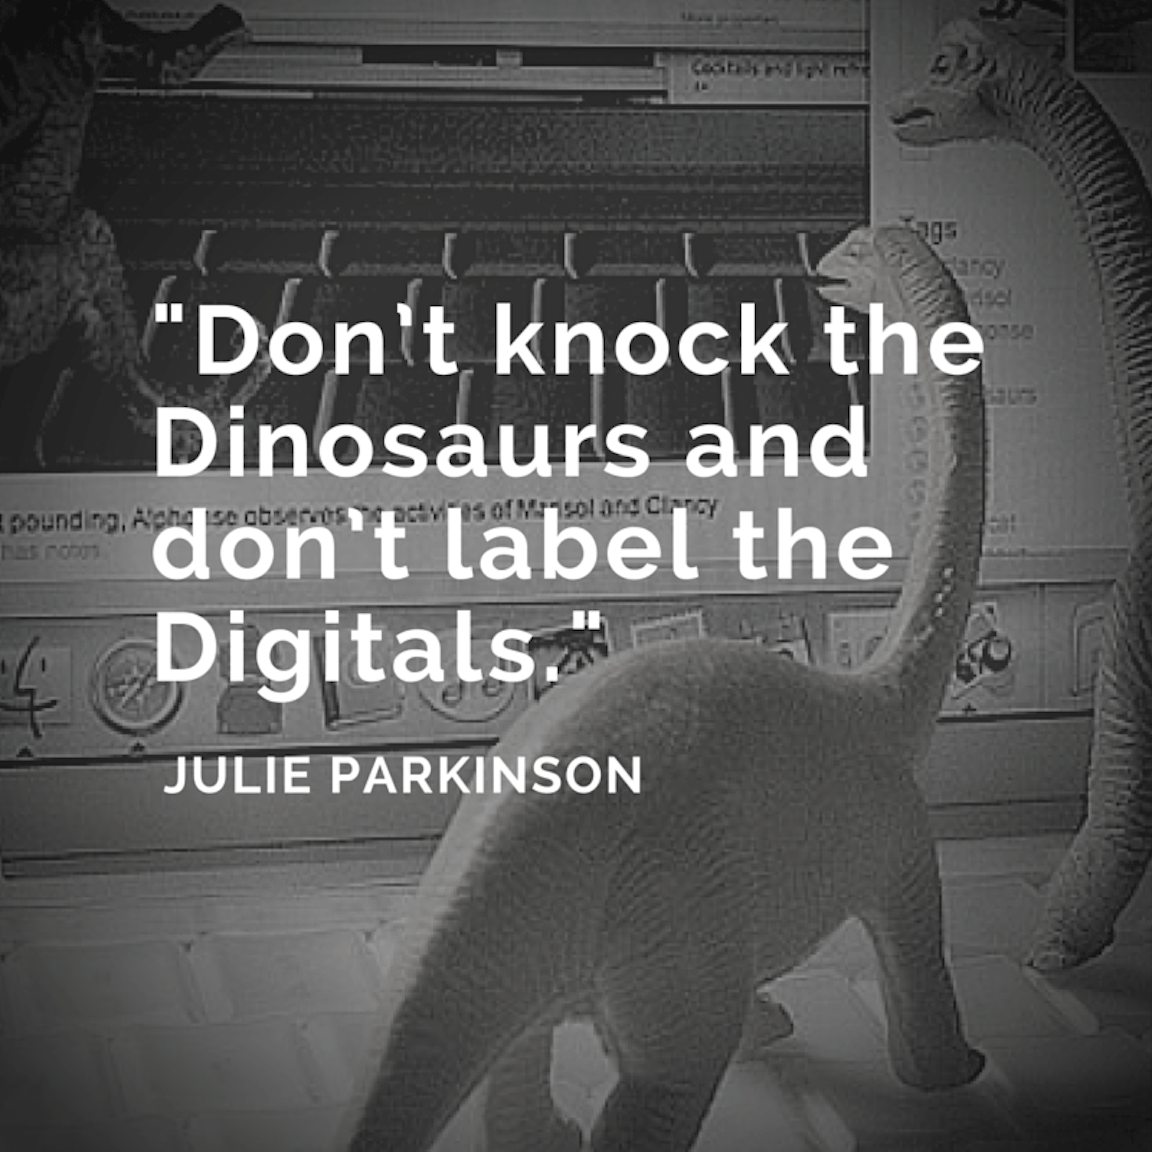 'Don't knock the dinosaurs and don't label the digitals' - Julie Parkinson